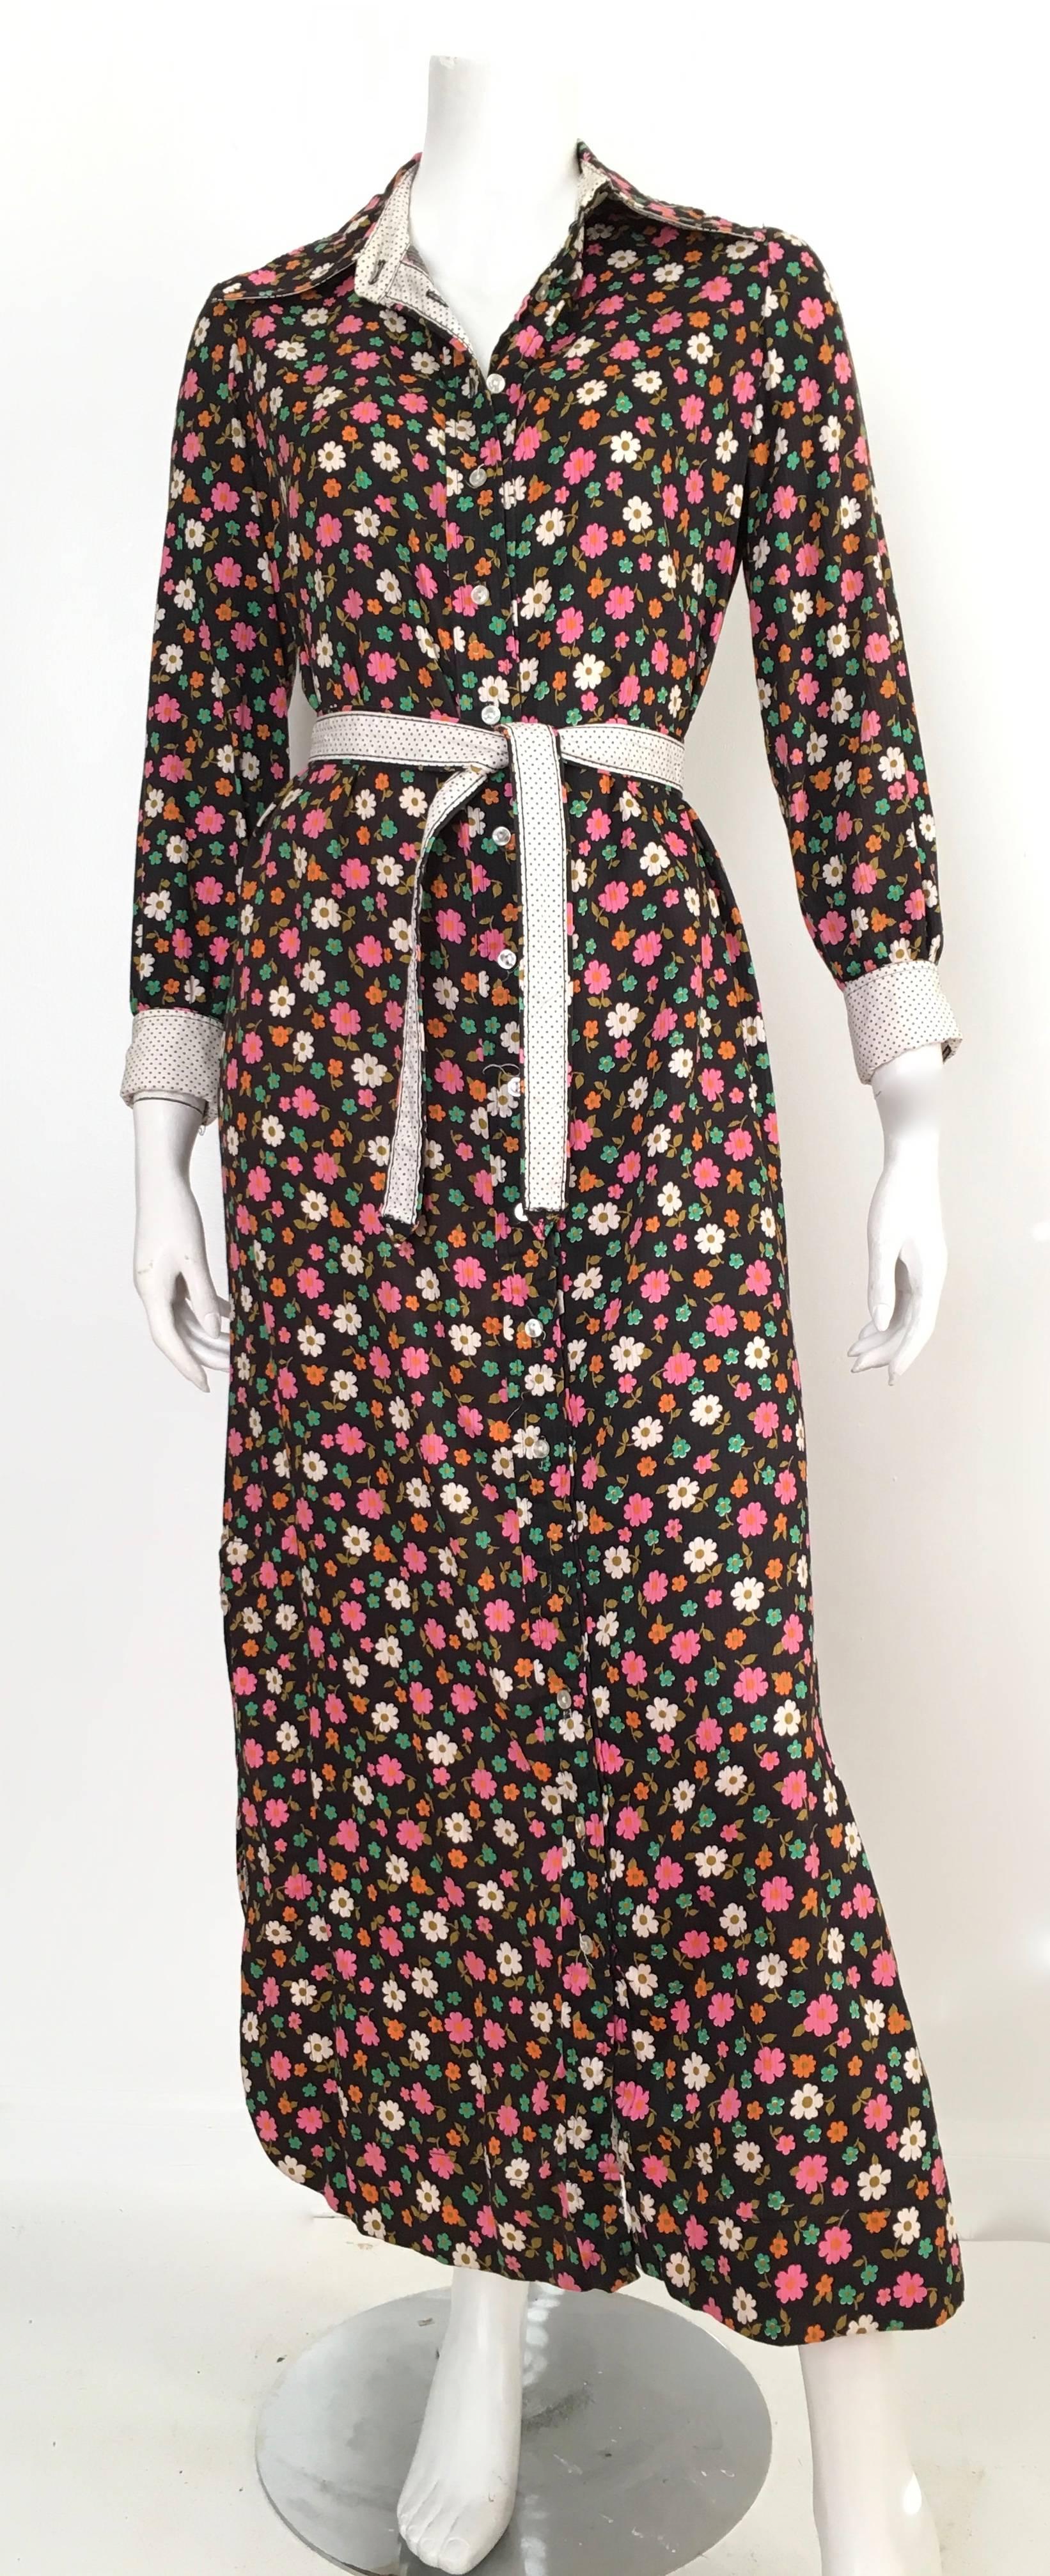 Geoffrey Beene 1960s cotton floral pattern button up dress with belt is a vintage size 14 and fits like a modern USA size 8.  Ladies please grab your trusted tape measure so you can properly measure your bust, waist & hips to make certain this will